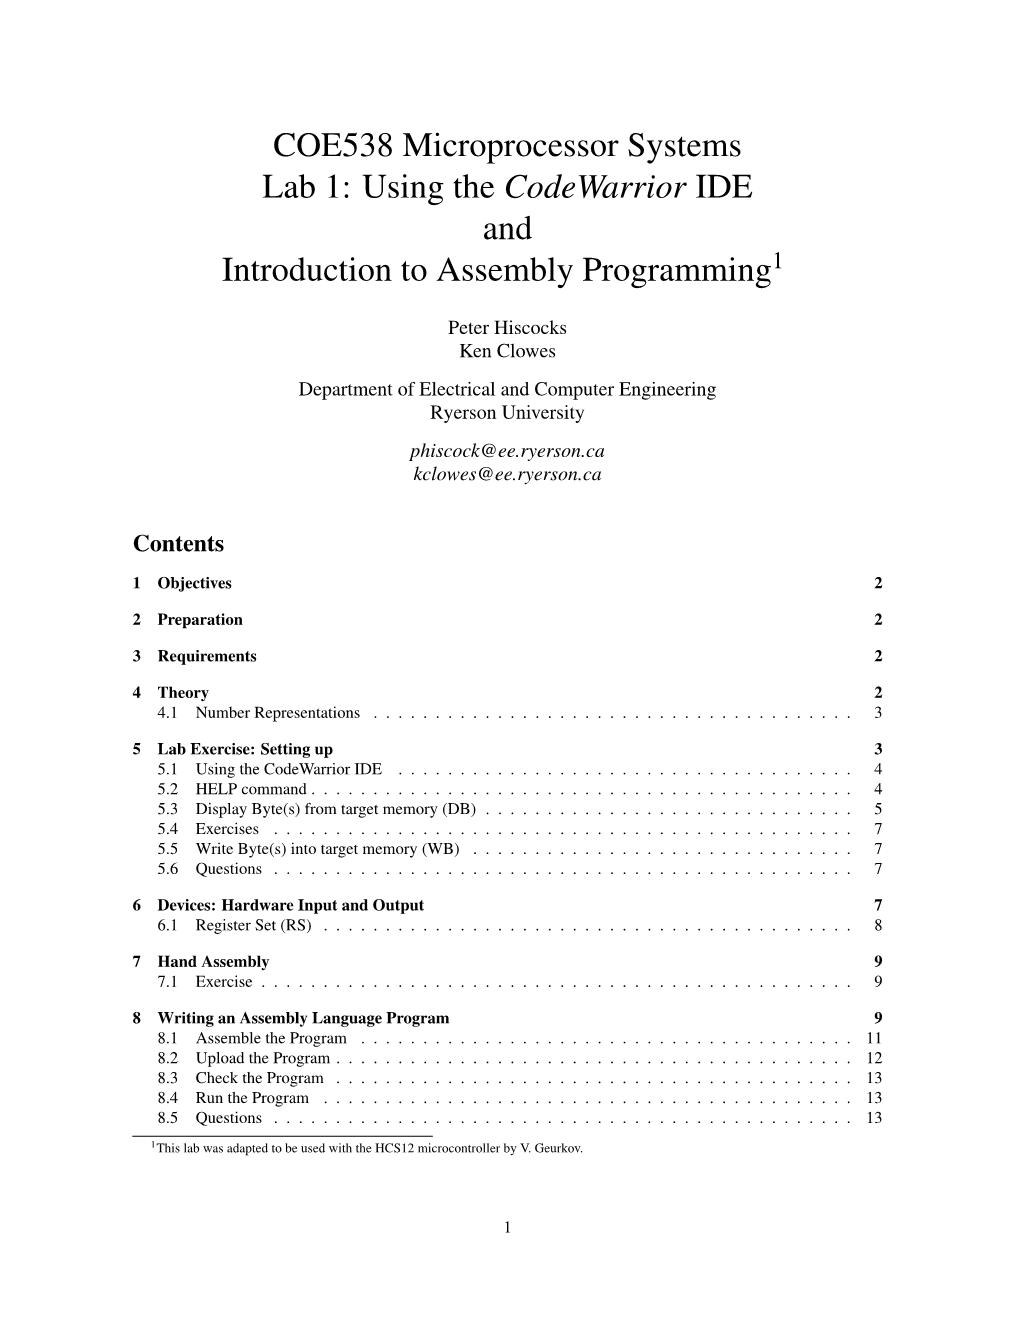 COE538 Microprocessor Systems Lab 1: Using the Codewarrior IDE and Introduction to Assembly Programming1